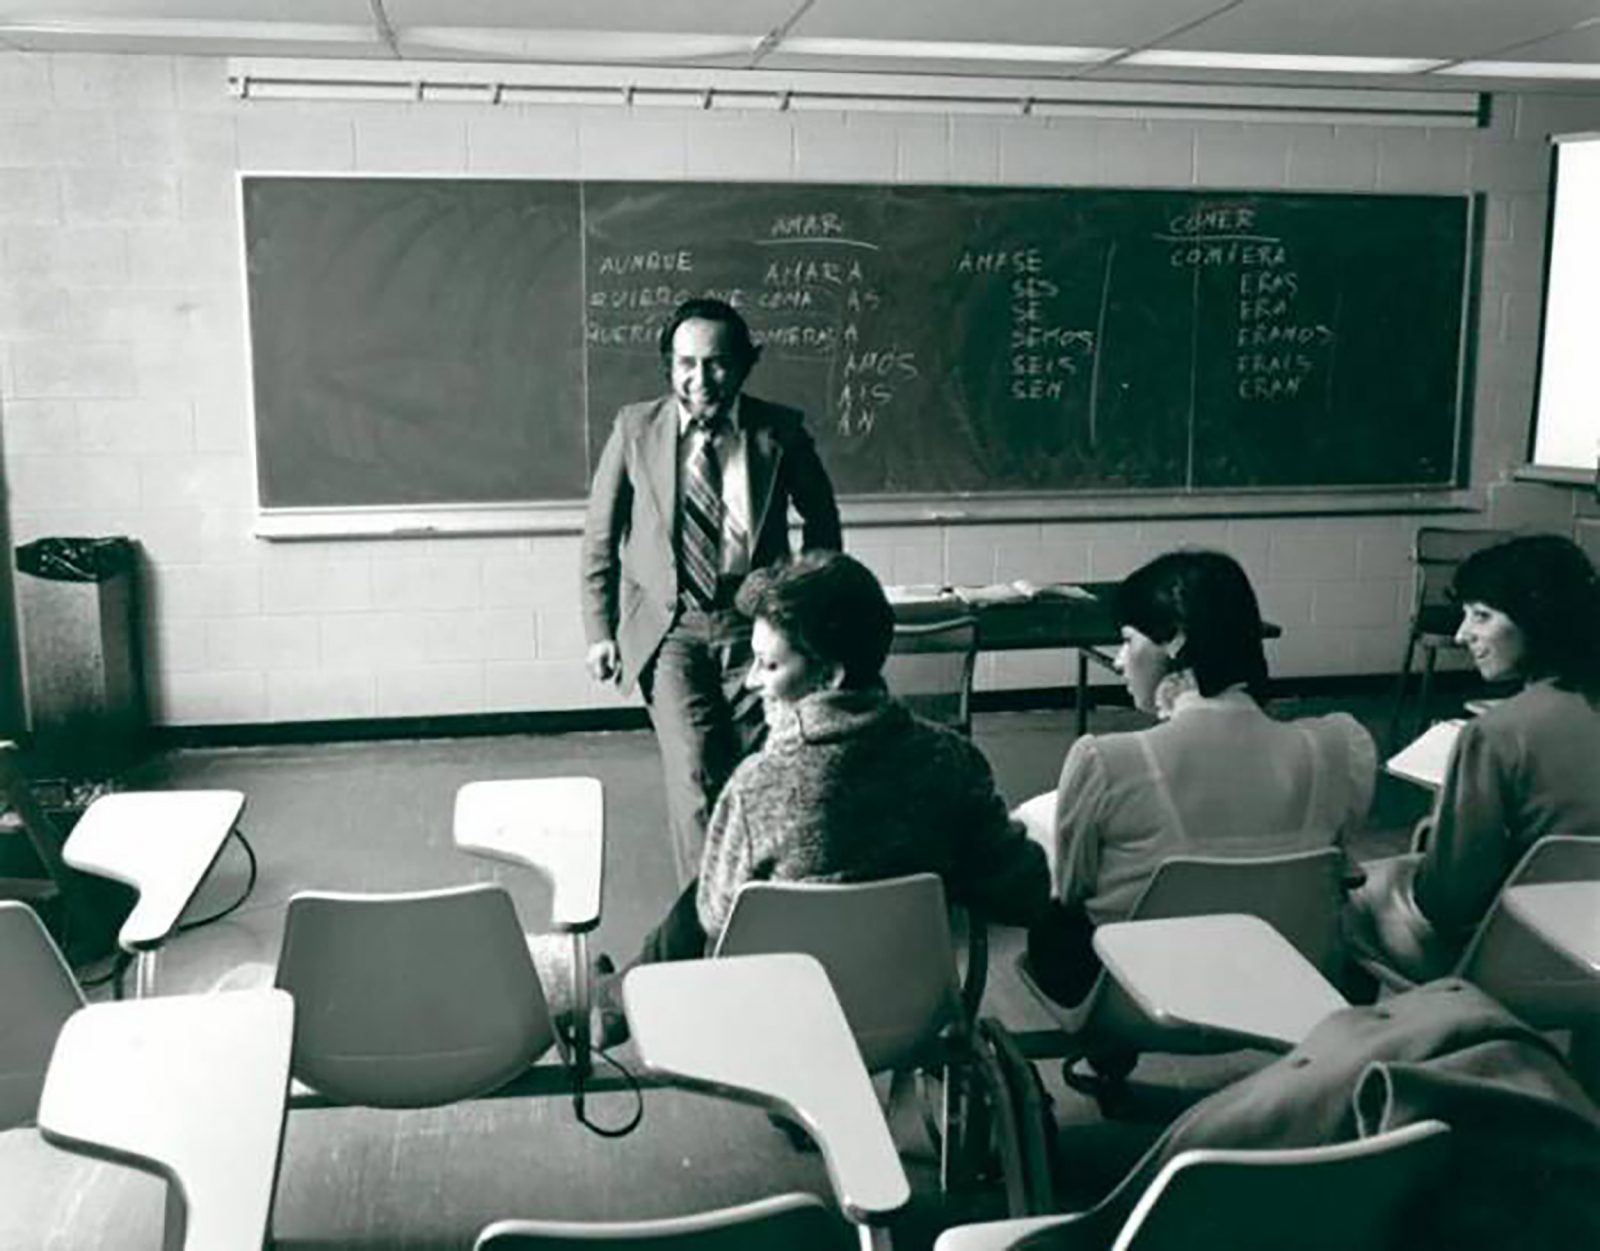 In a black and white photo of a university classroom, Brock Spanish professor Juan Amadeo Fernandez leans against a desk smiling at three students sitting in front of him.